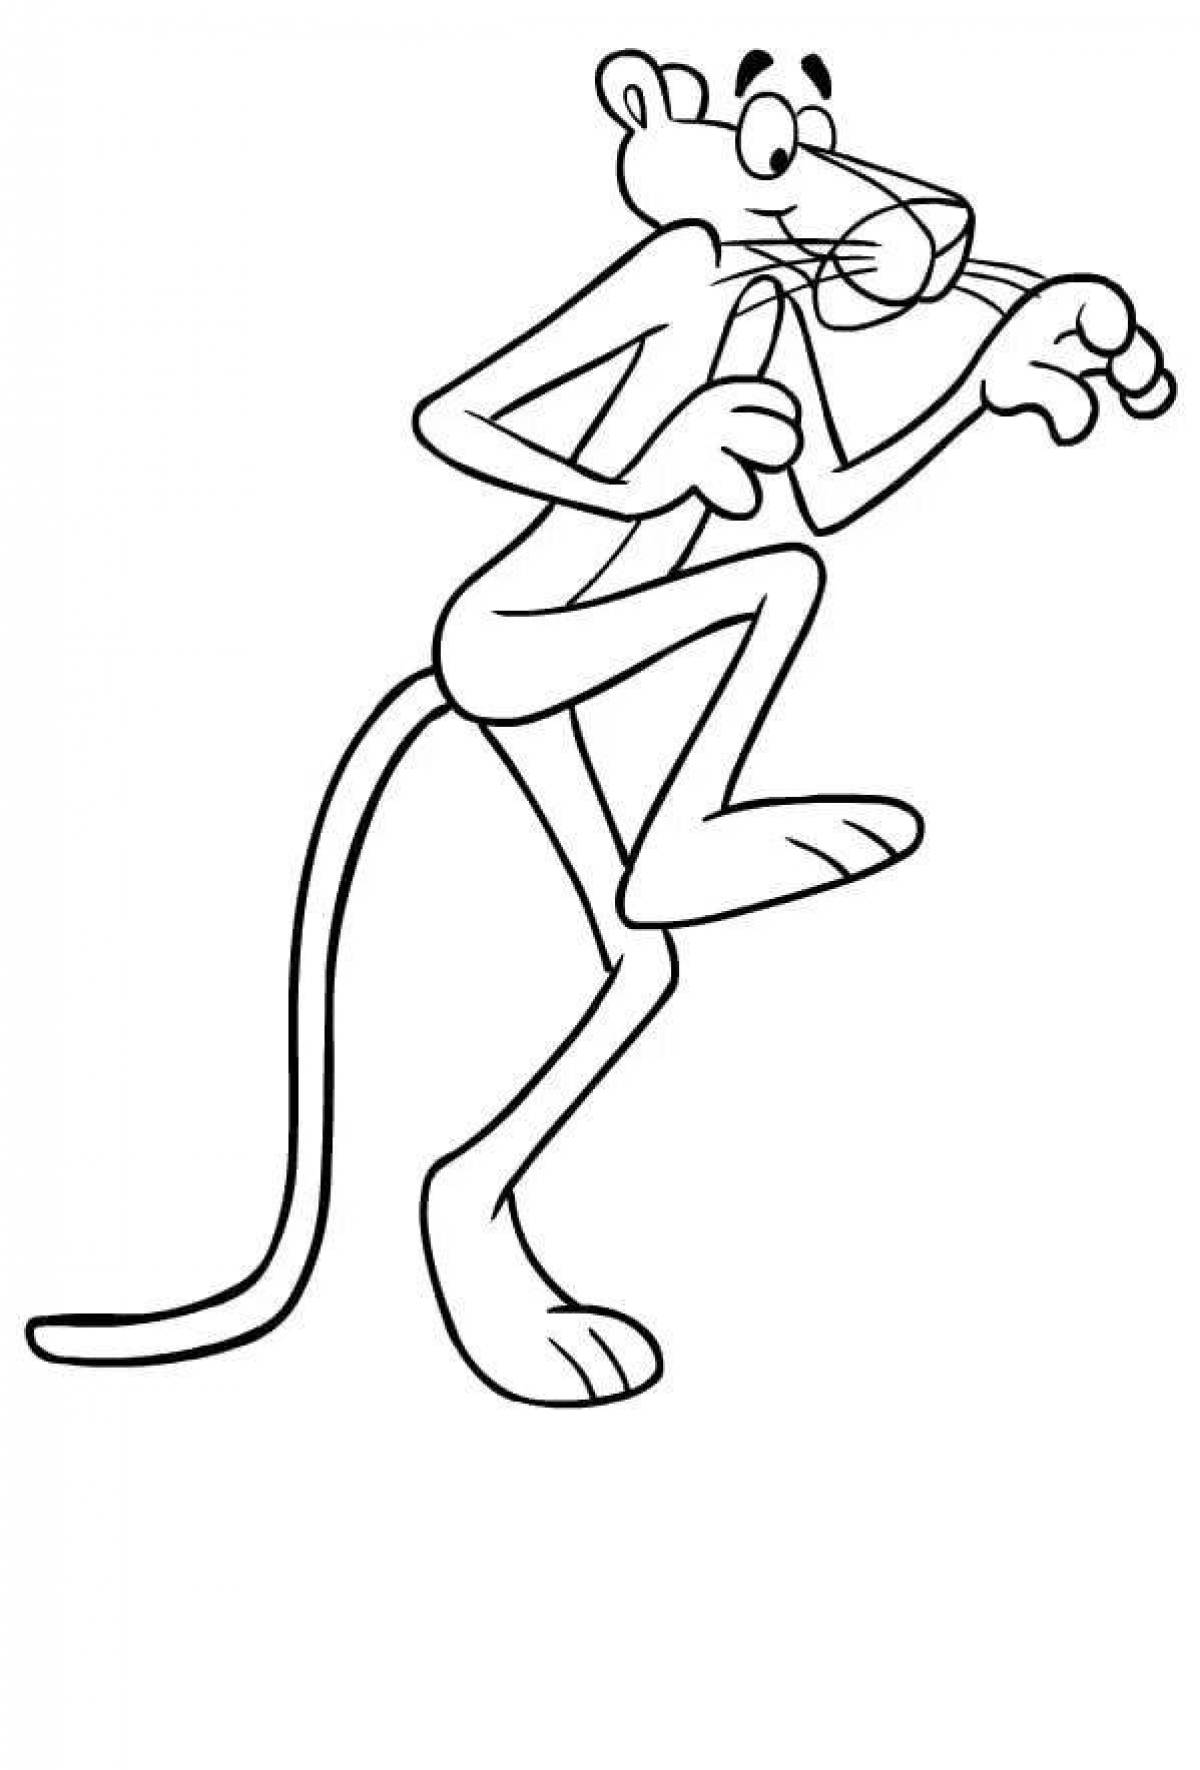 Gorgeous pink panther coloring page